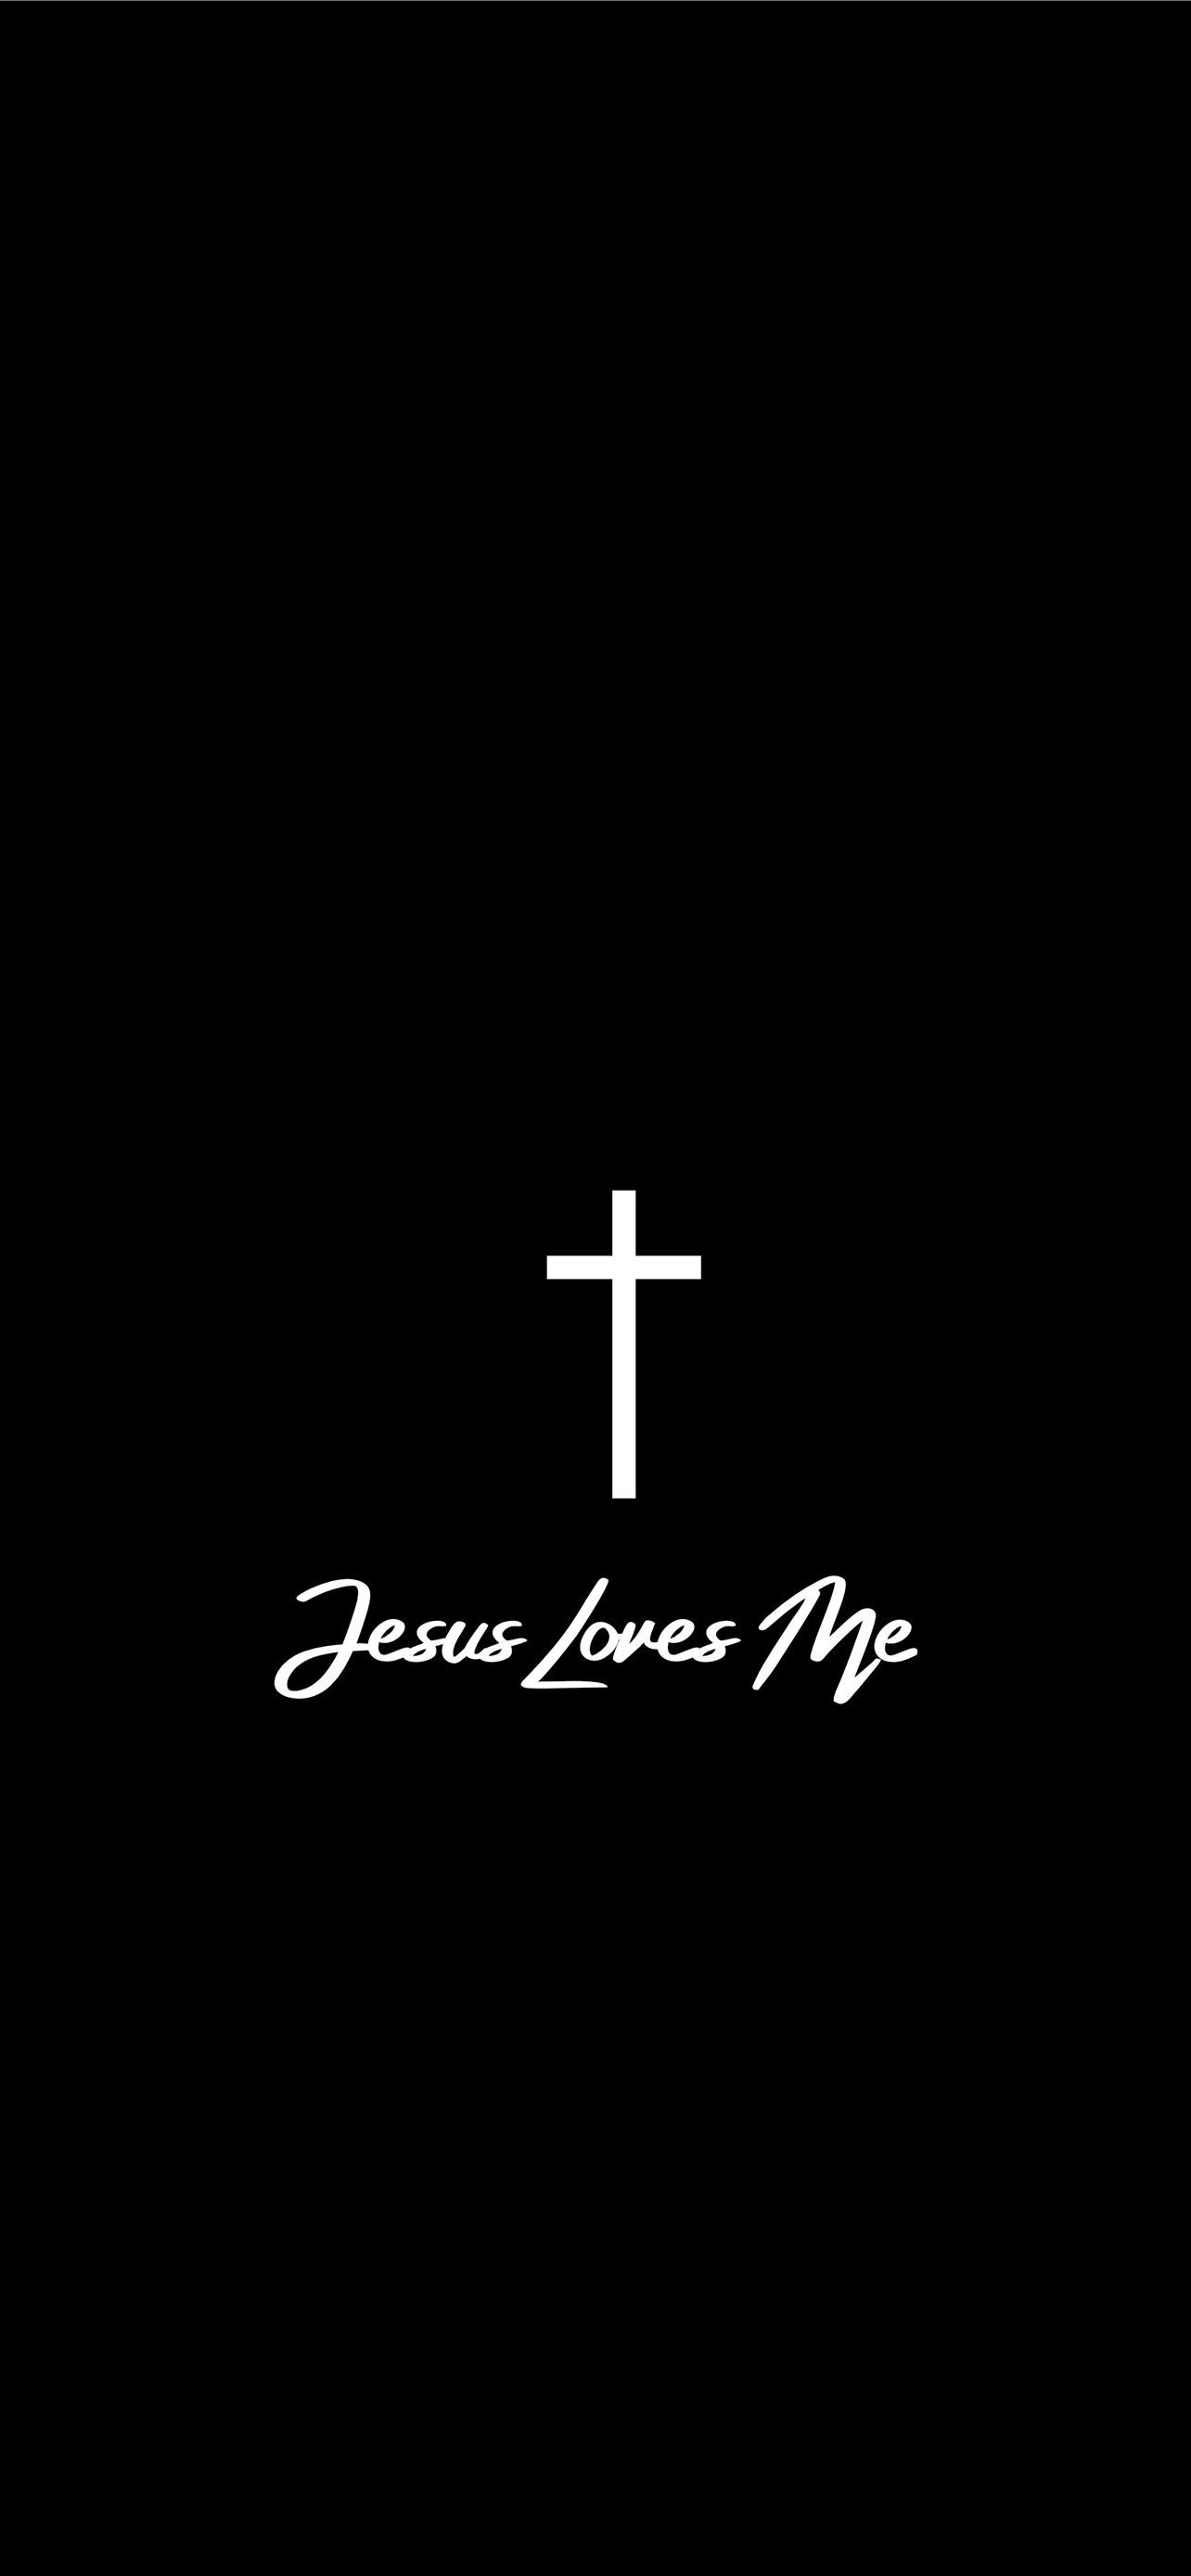 The cross and a black background with white text - Christian, Jesus, christian iPhone, cross